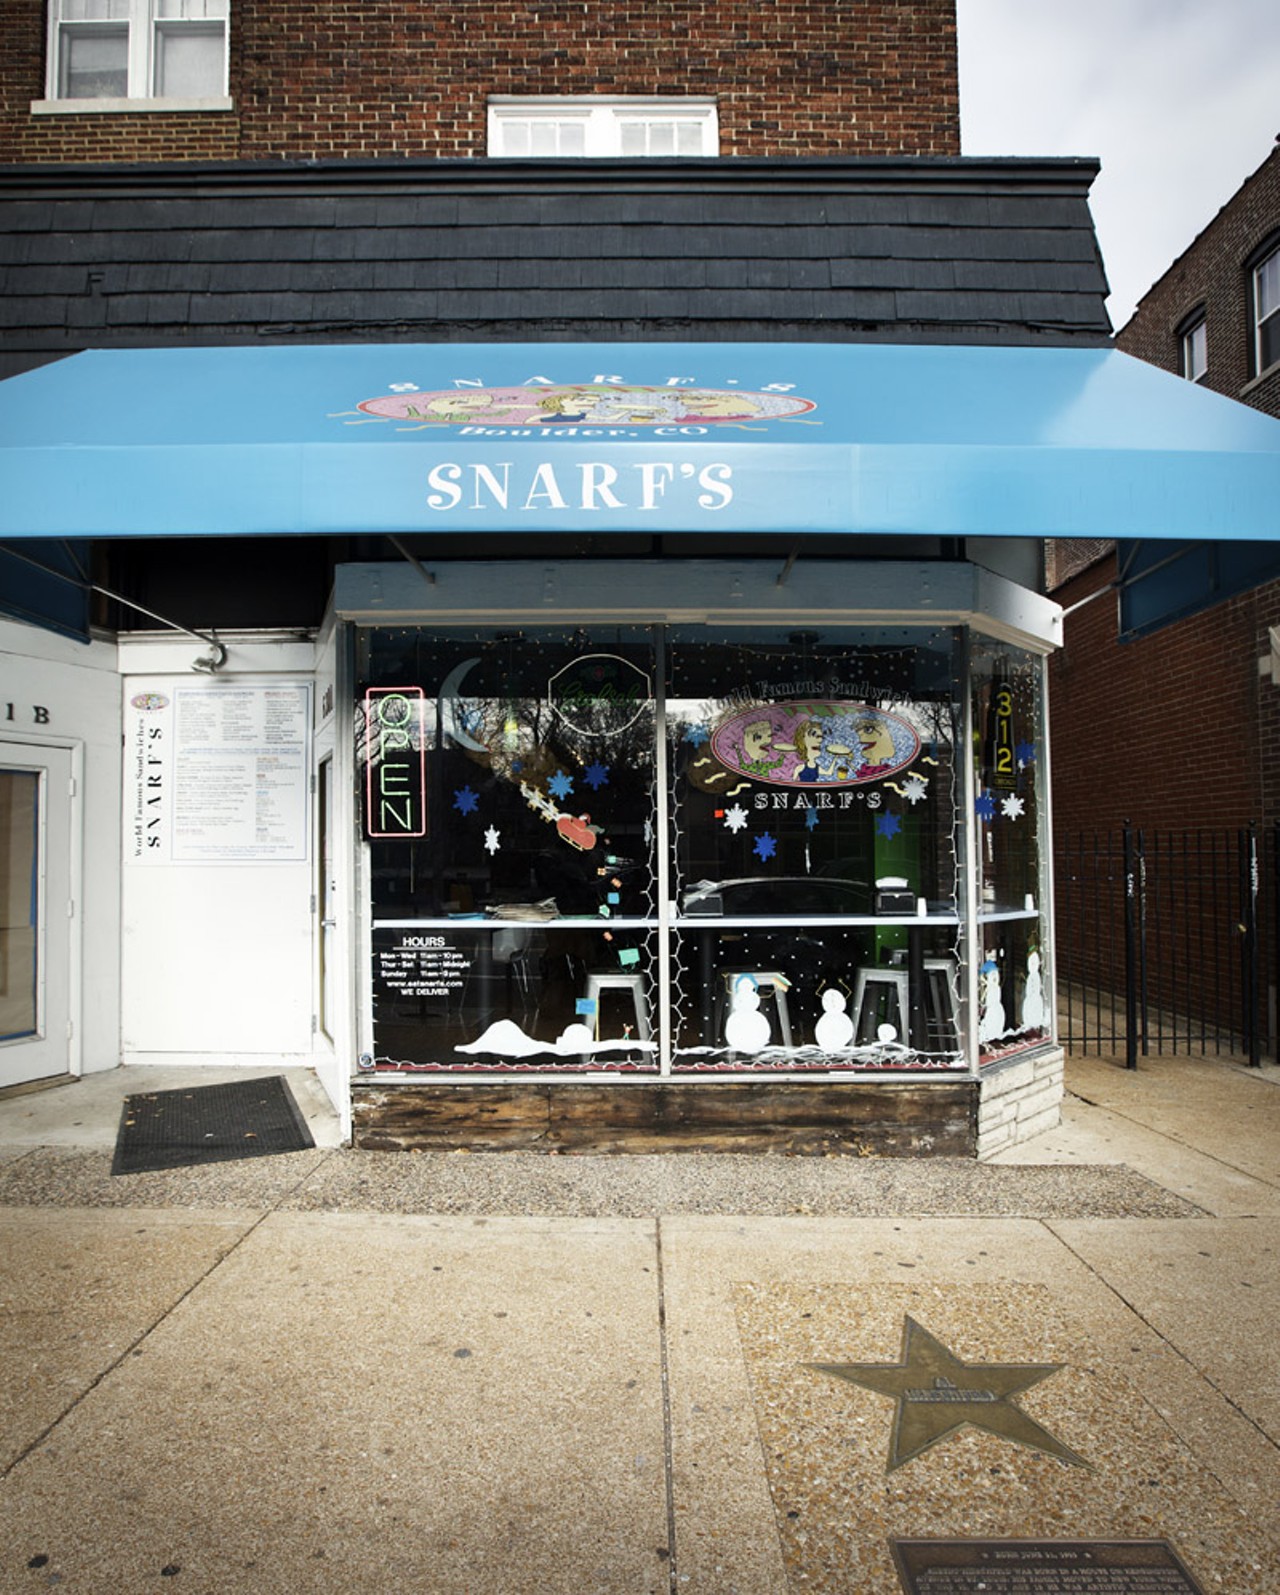 Snarf's, a recent addition to The Loop, is a family owned sandwich shop with other locations in Colorado and Chicago.